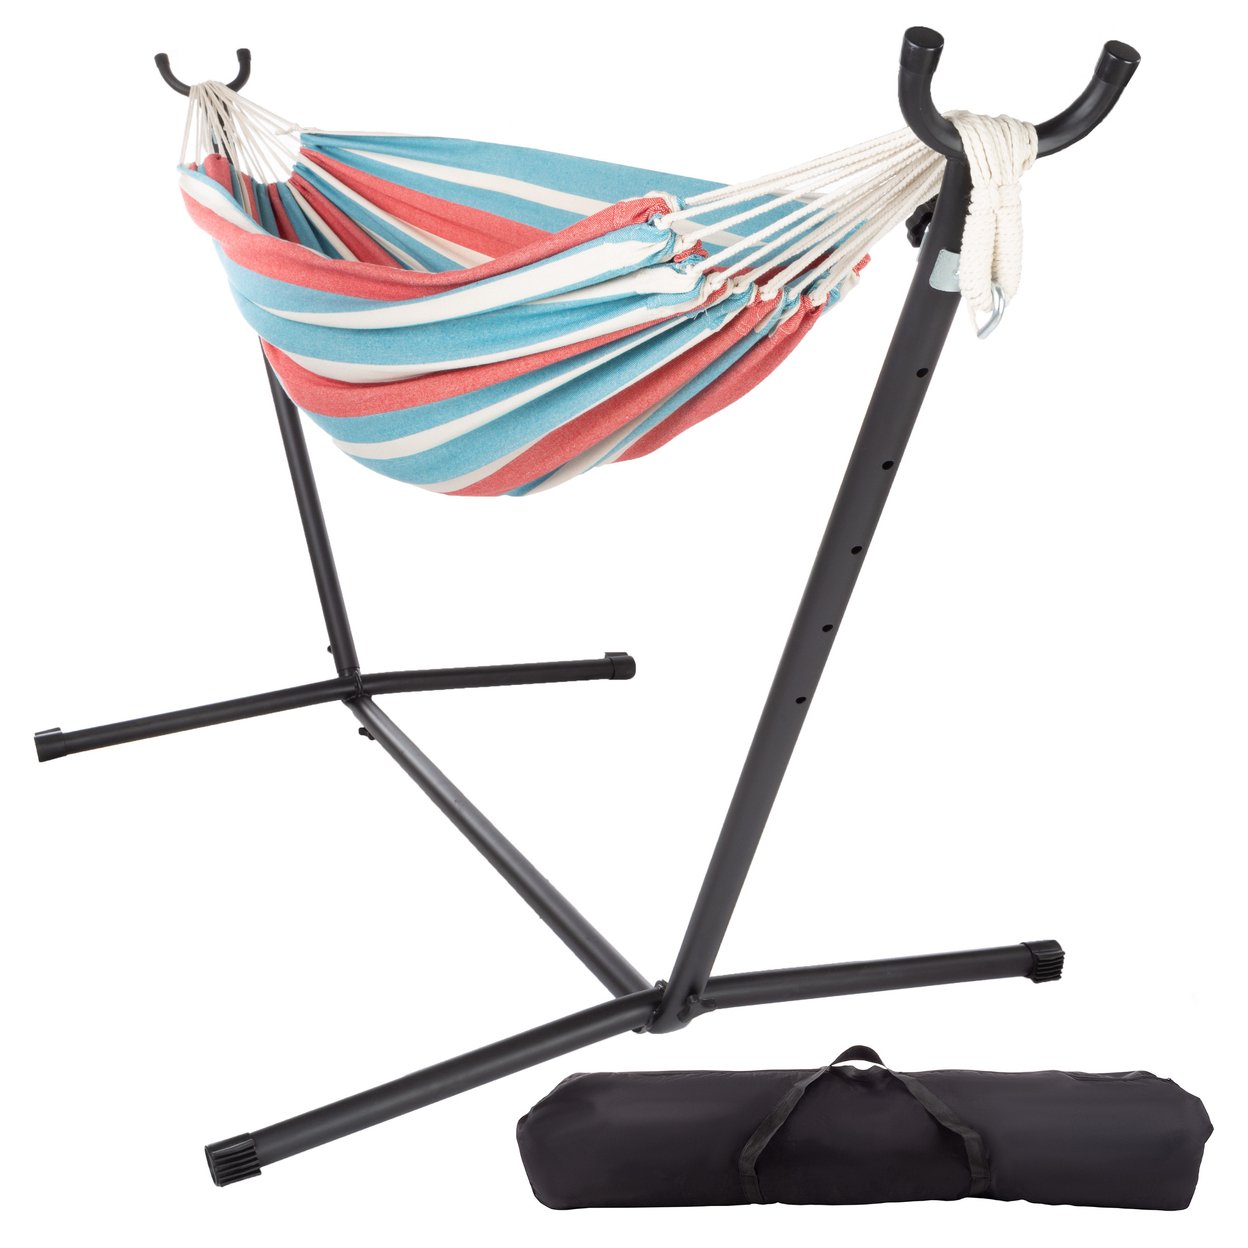 2 Person Hammock With Stand Brazilian Style Woven Cotton Swing 450 Lb Capacity